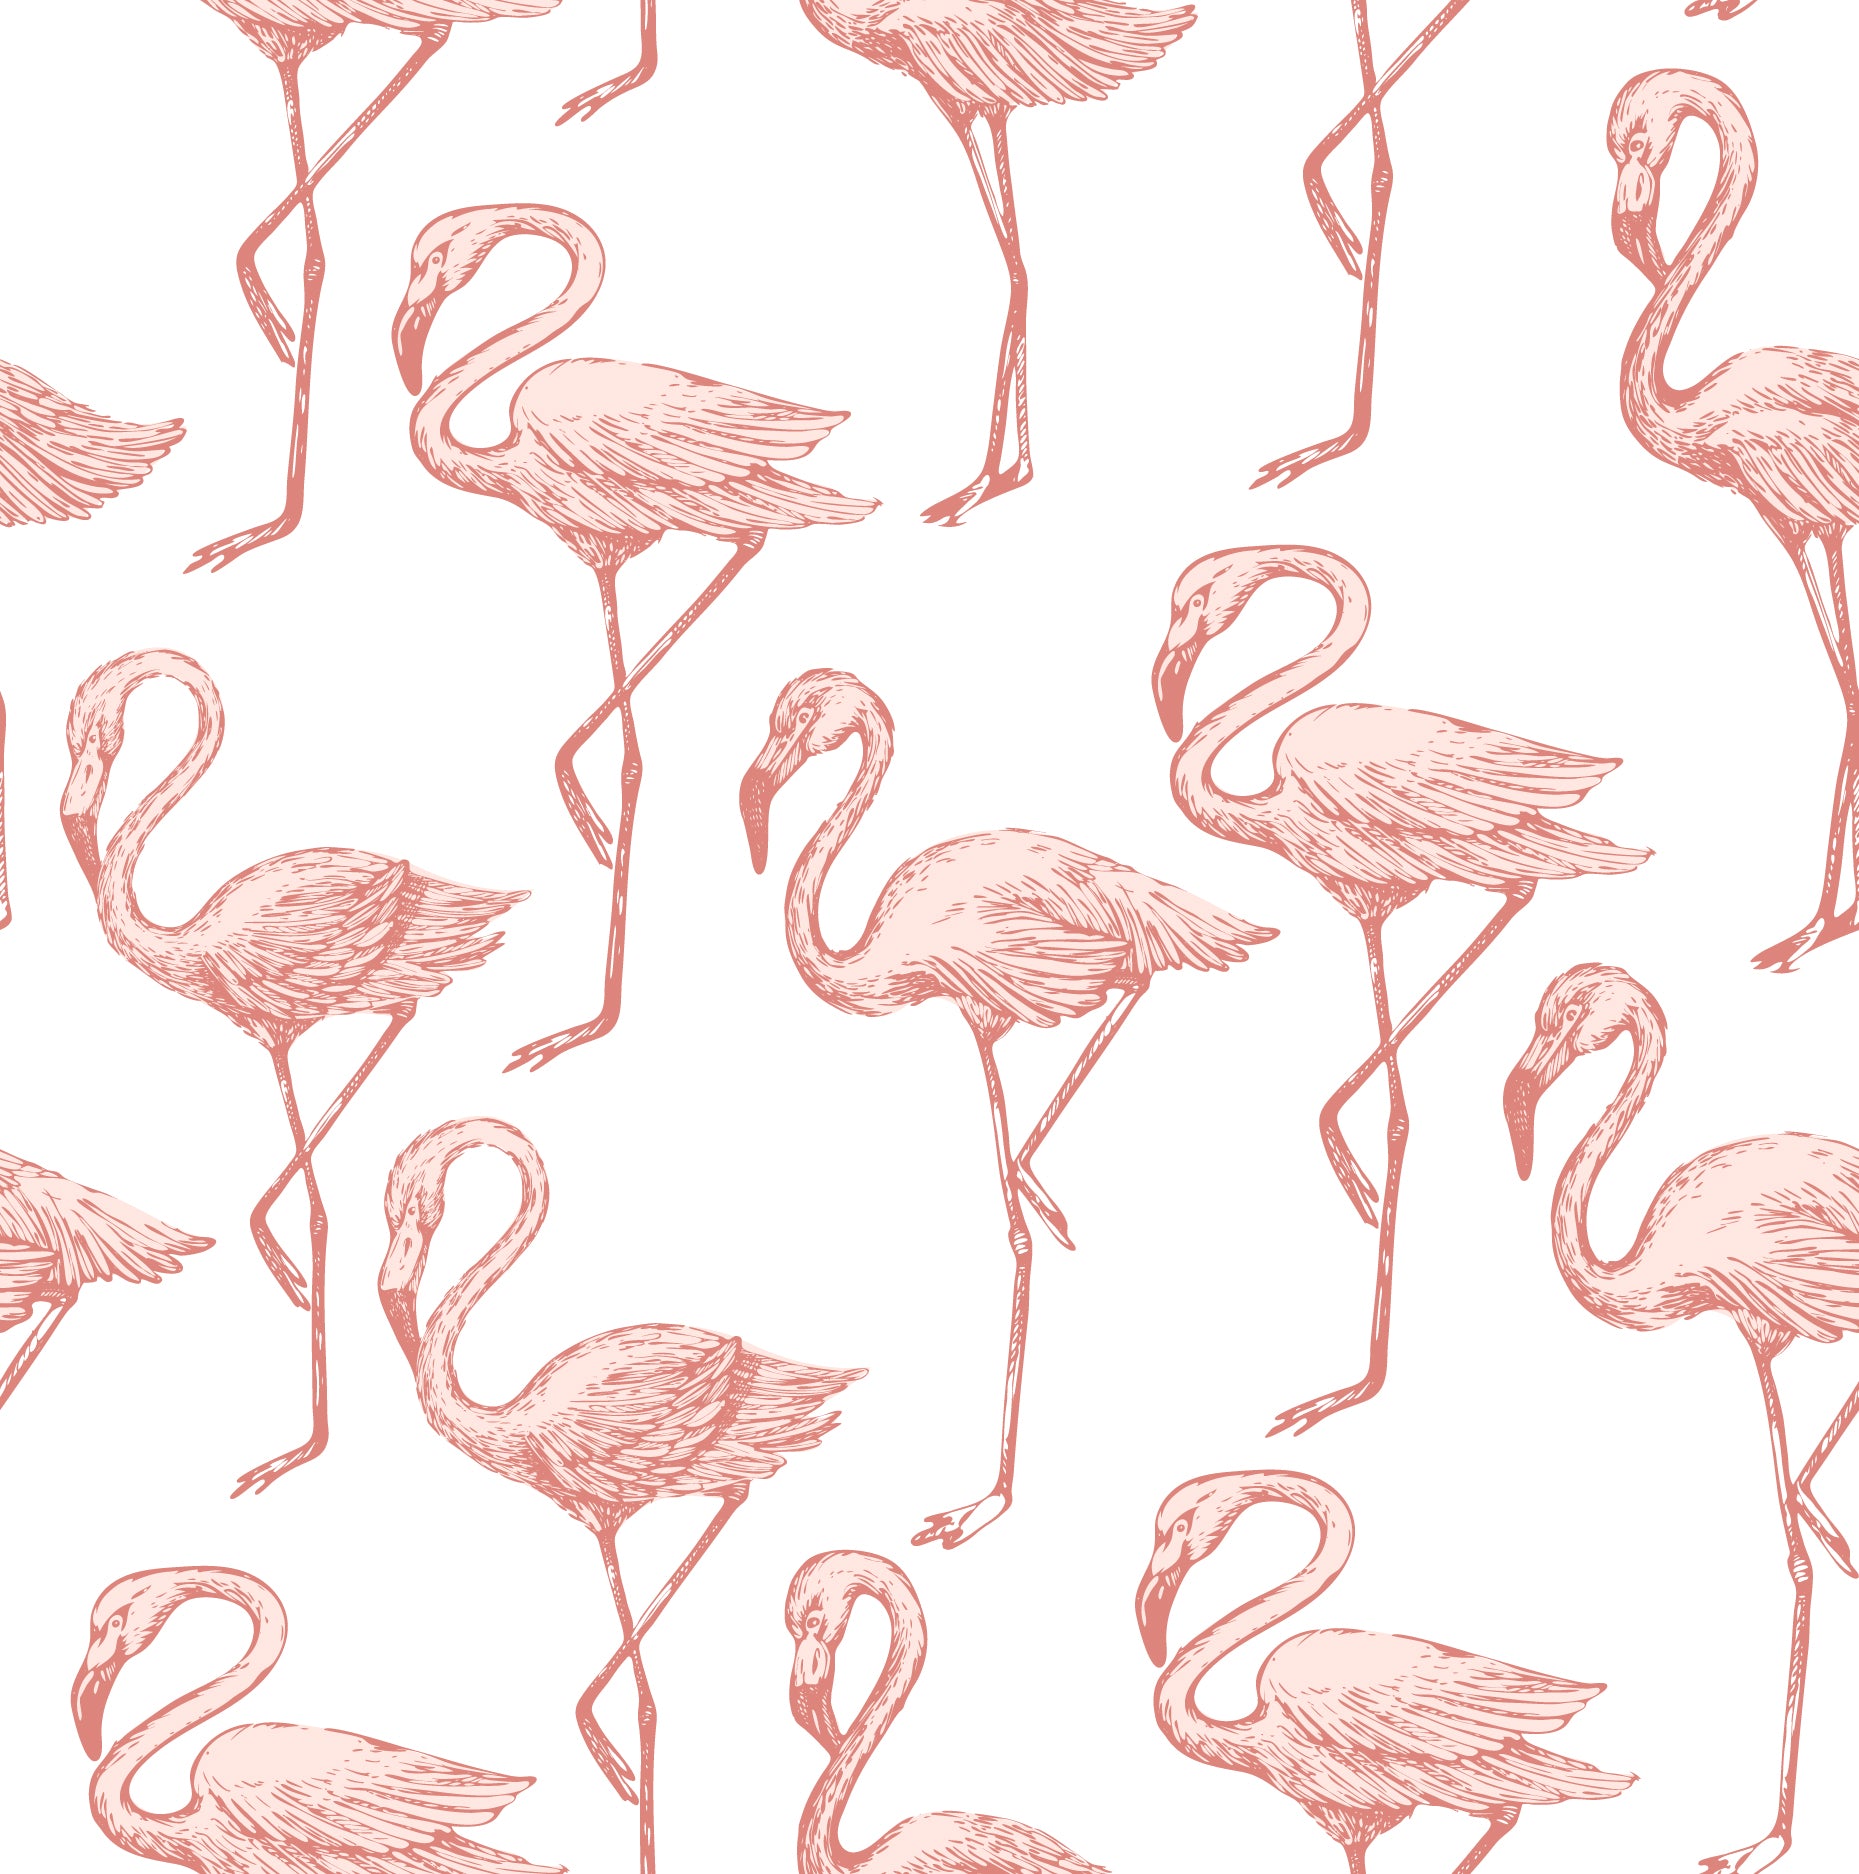 A detailed view of the Flamingo Party Wallpaper, showing the vibrant pattern of pink flamingos in various poses, artistically rendered with a sense of movement and grace against a crisp white background.